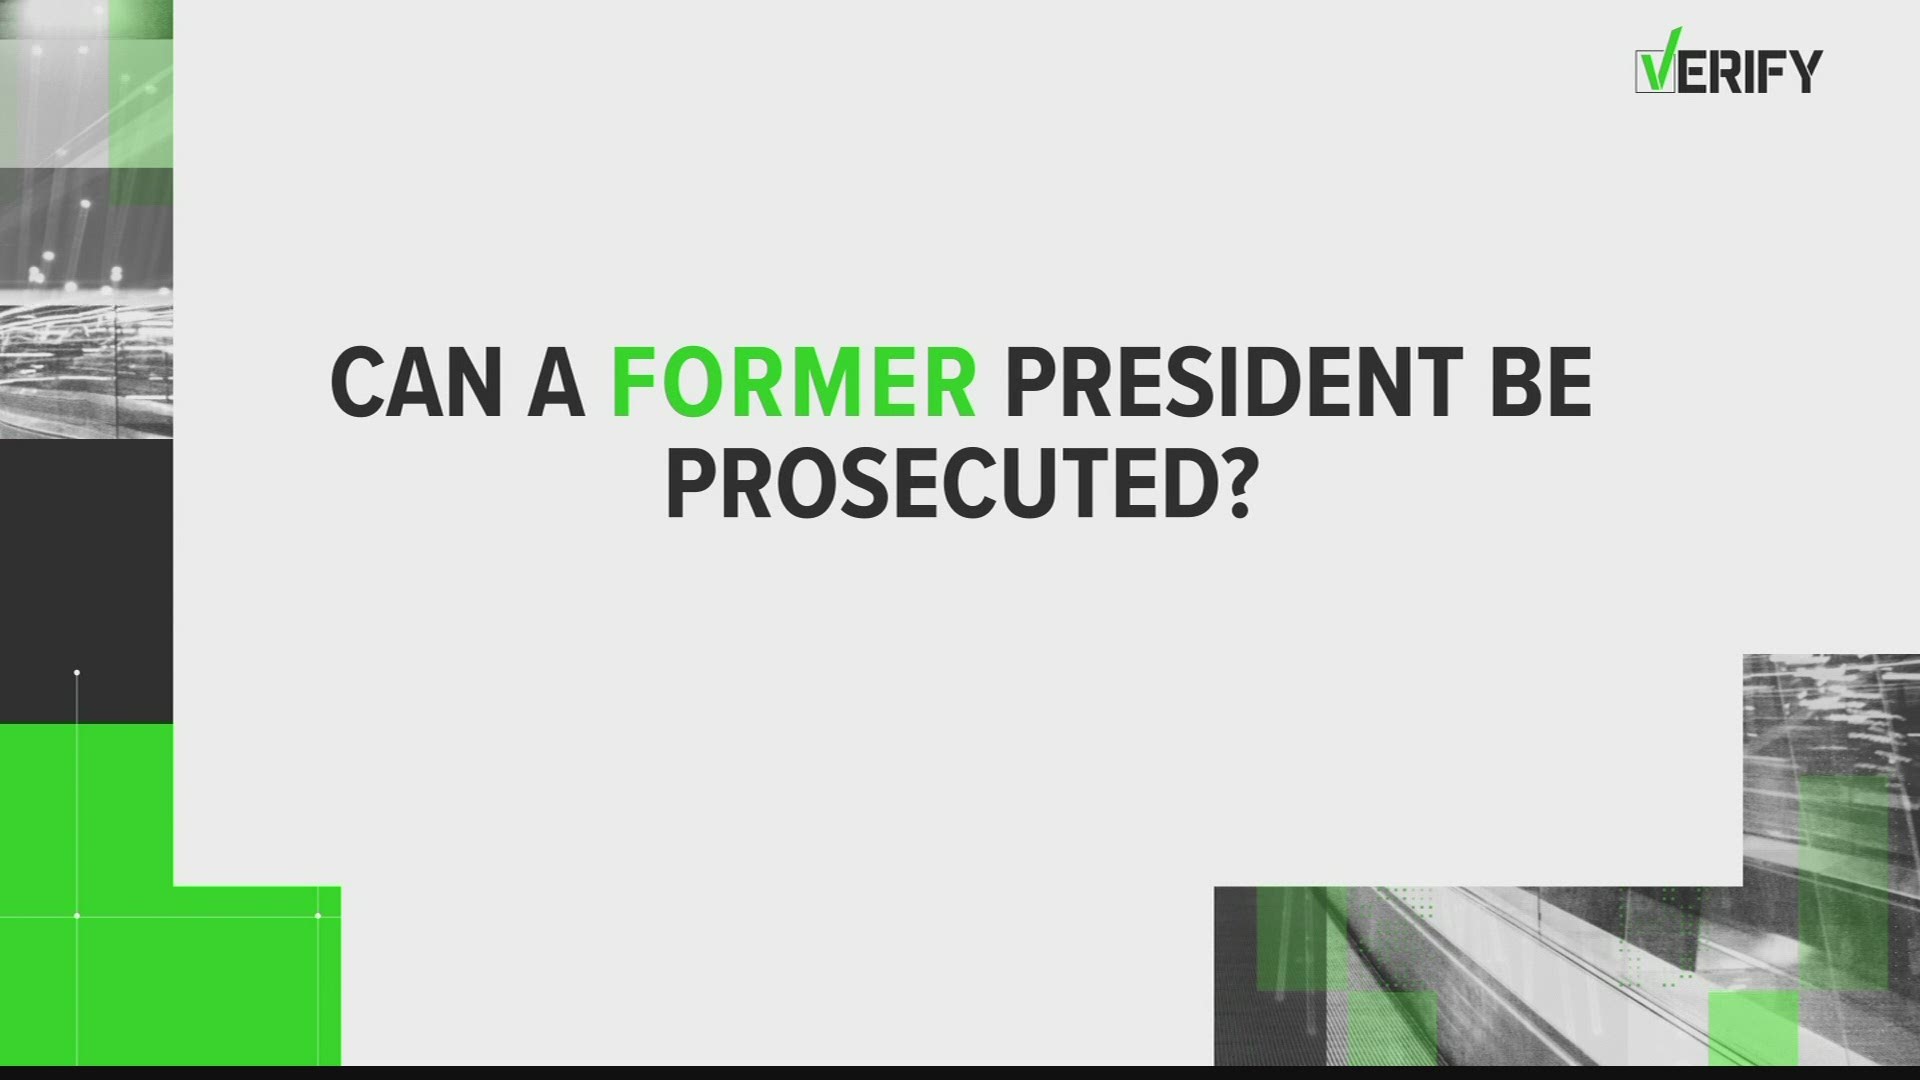 The VERIFY team set out to answer your questions about whether former presidents can be prosecuted.